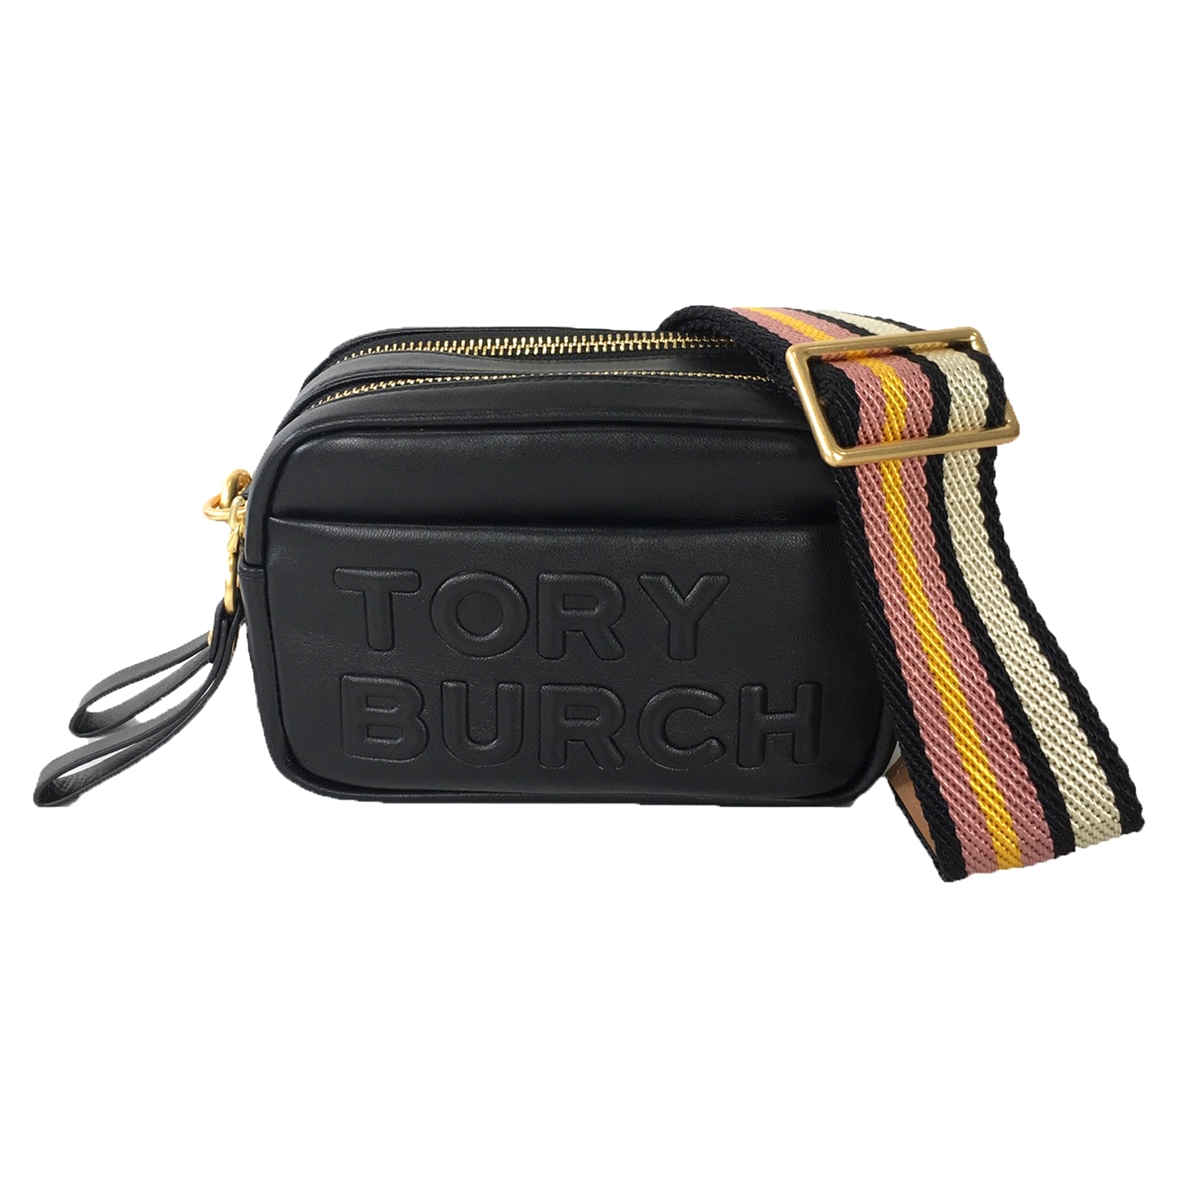 TORY BURCH: Perry bag in textured leather - Black